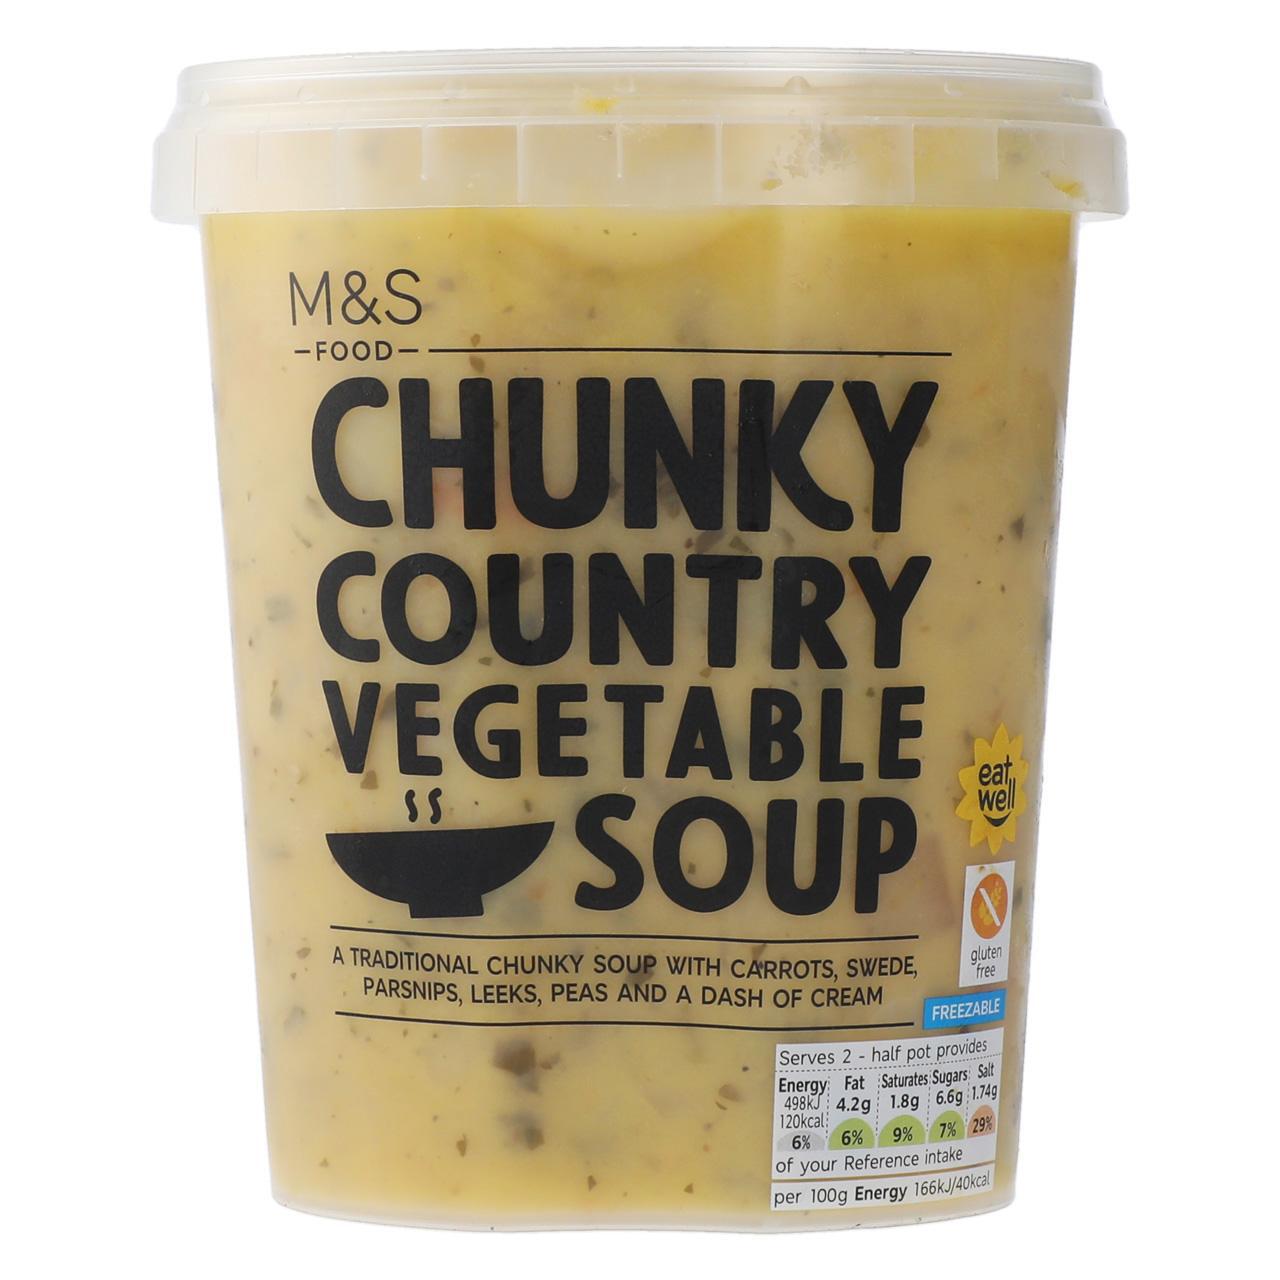 M&S Chunky Country Vegetable Soup 600g